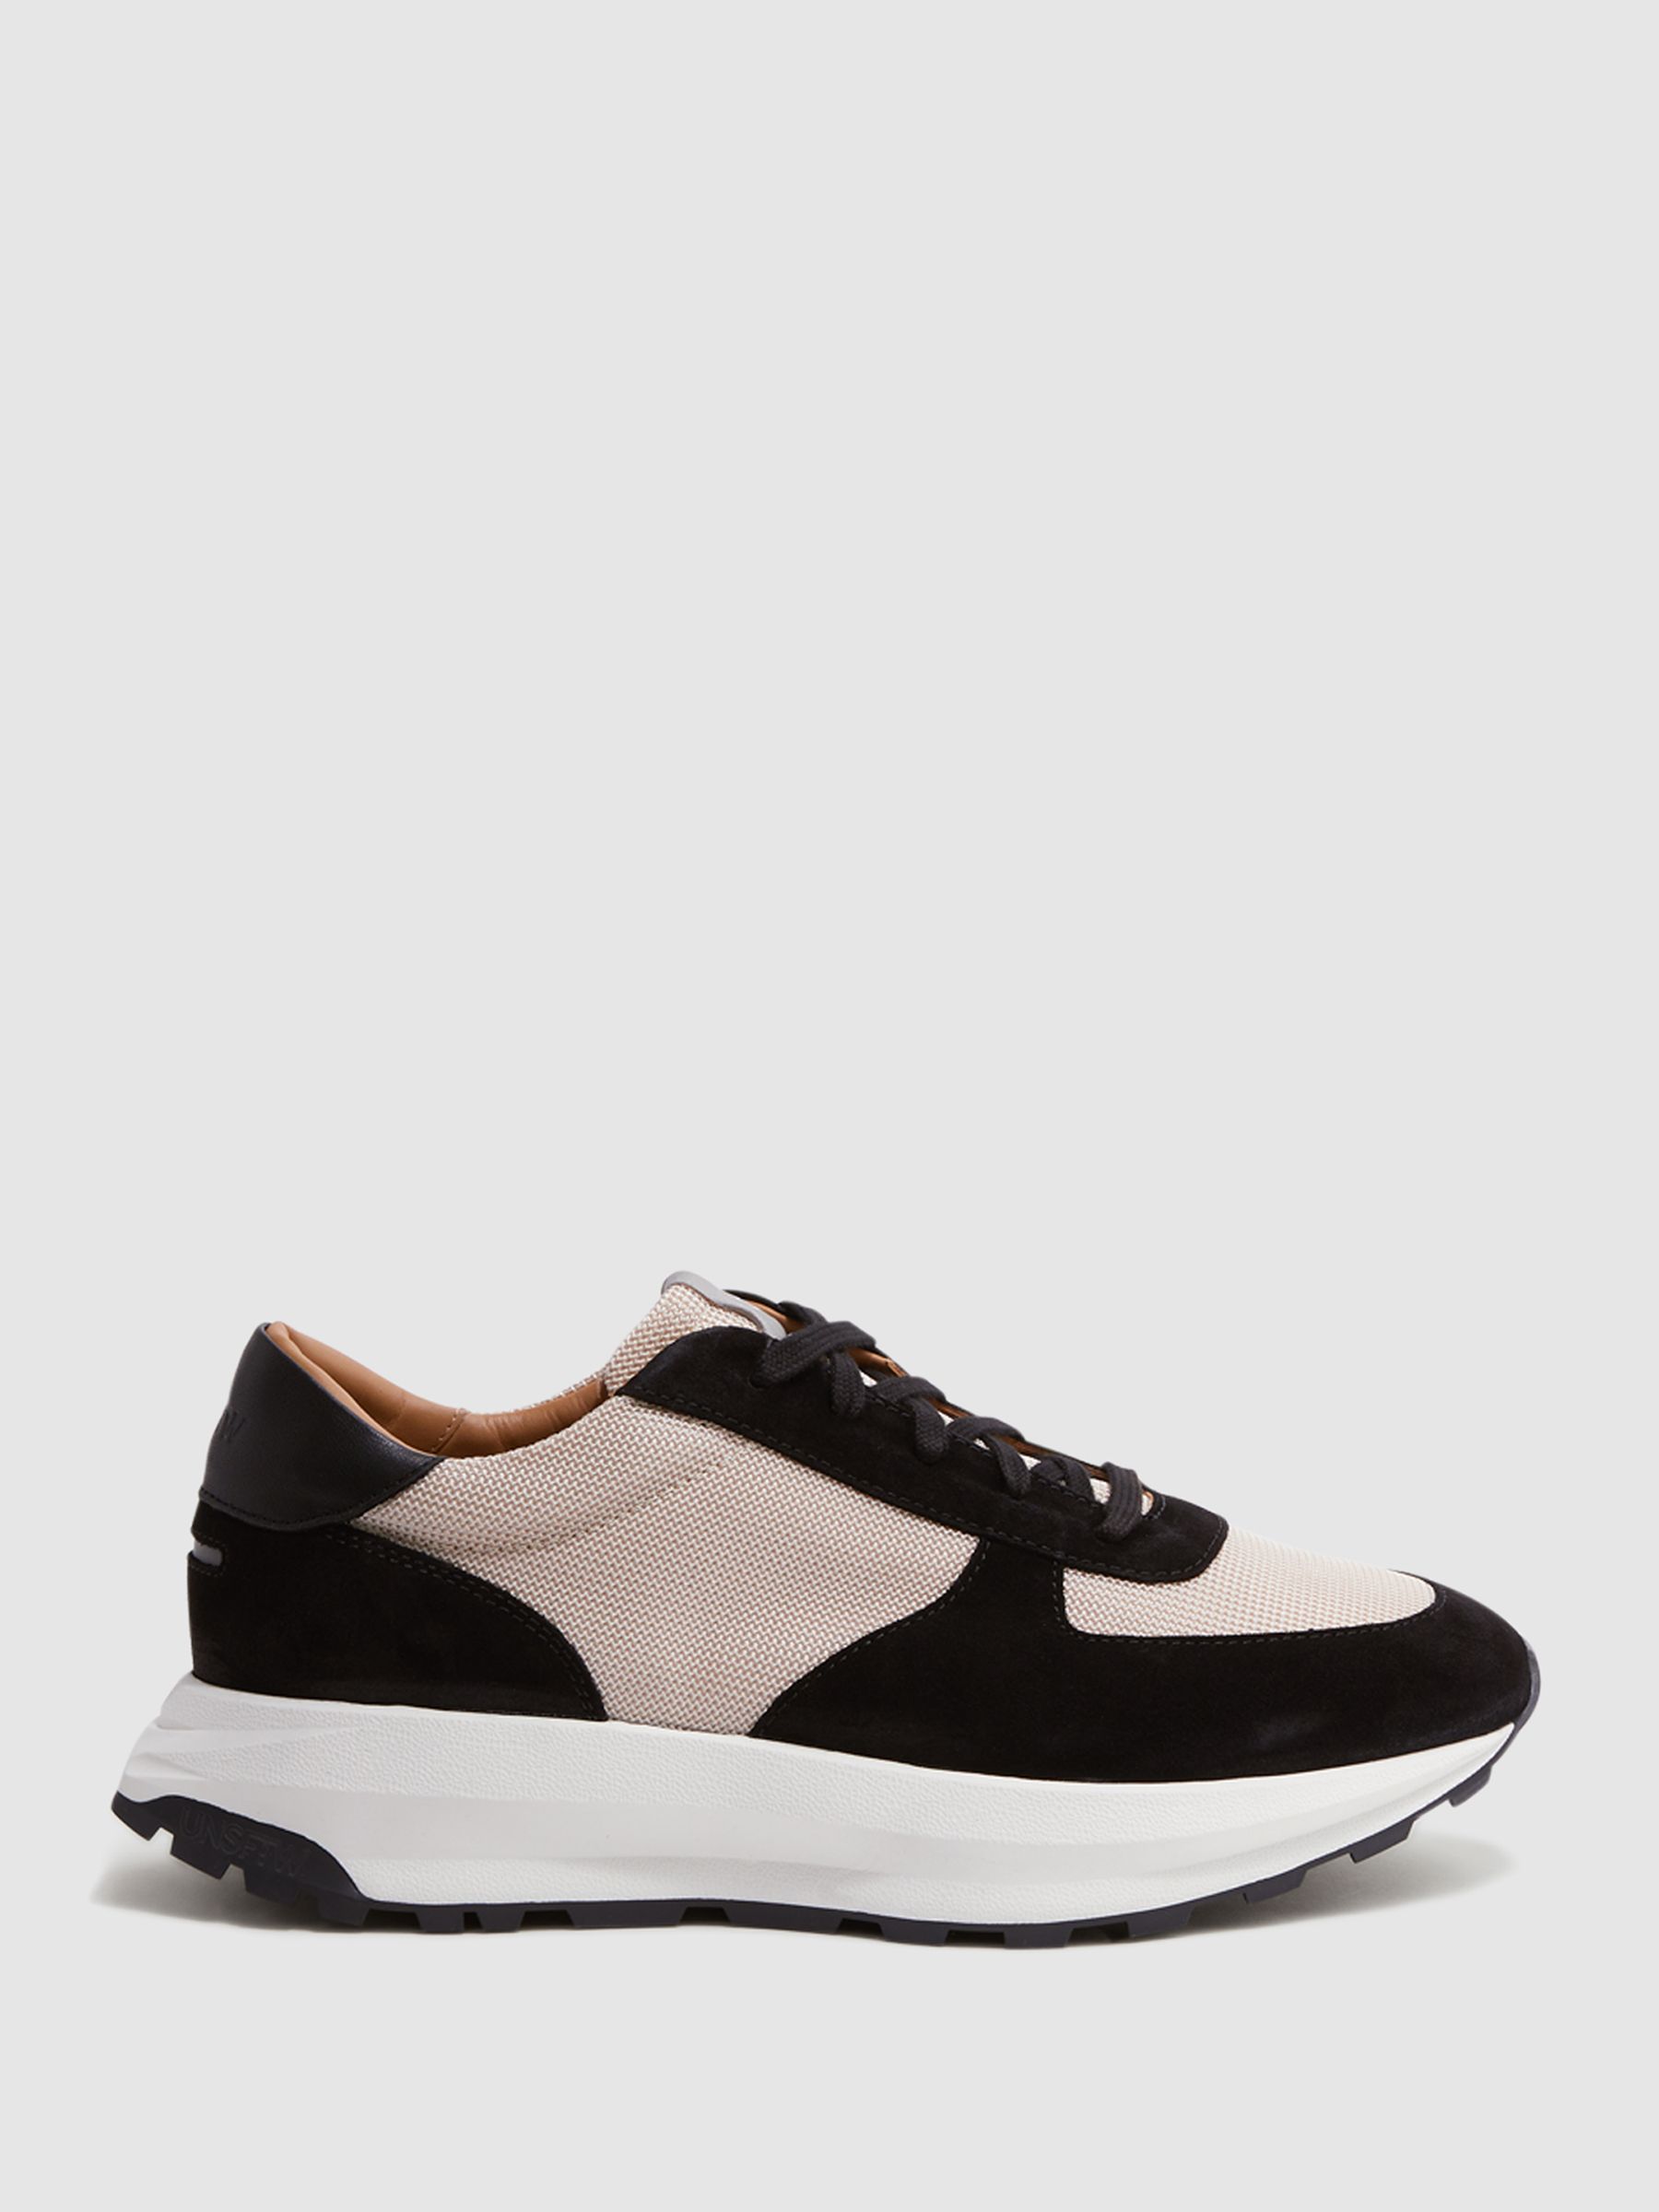 Unseen Trinity Tech Trainers in Black/White - REISS